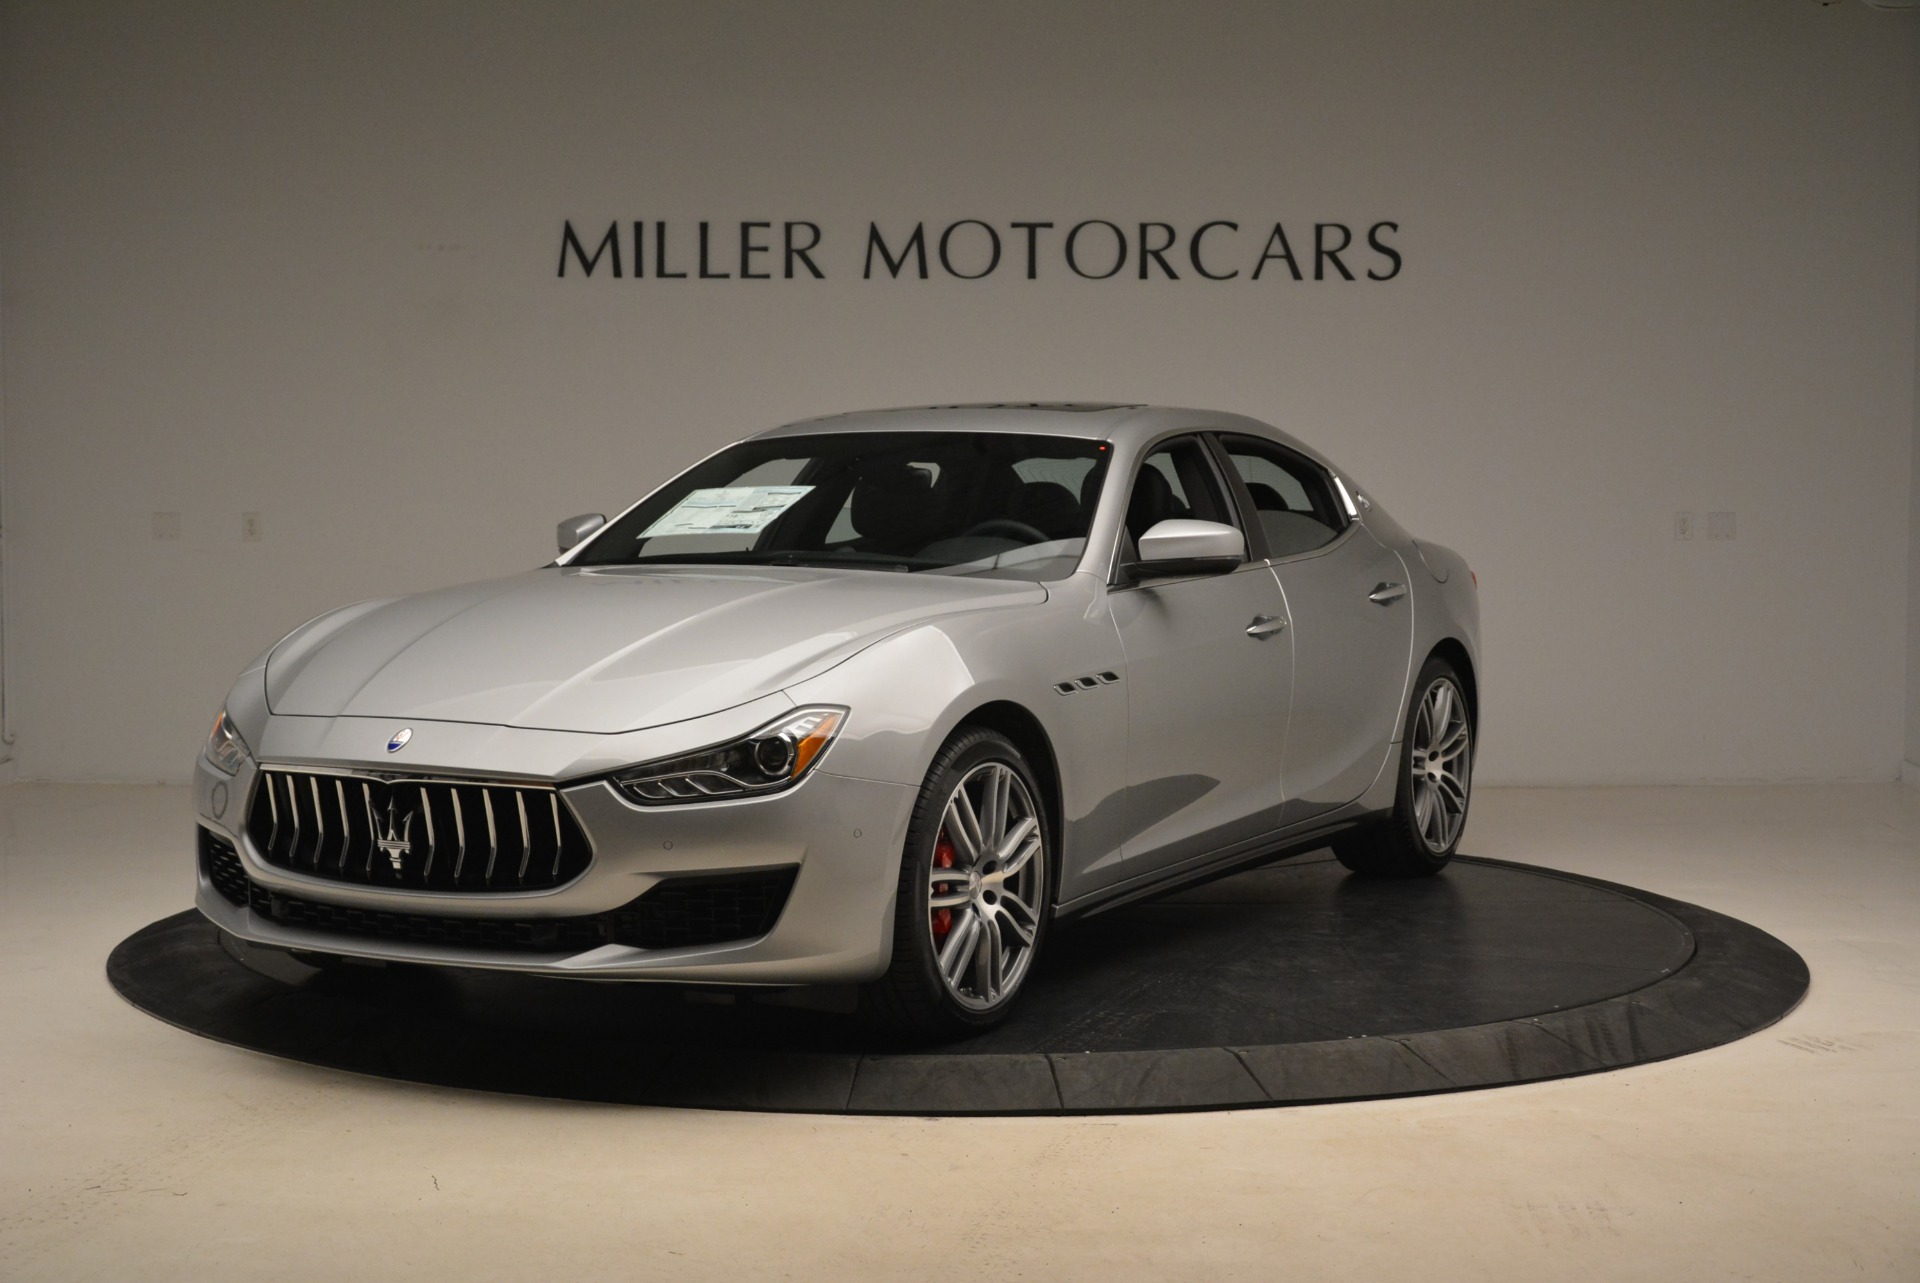 Used 2018 Maserati Ghibli S Q4 for sale Sold at Maserati of Greenwich in Greenwich CT 06830 1